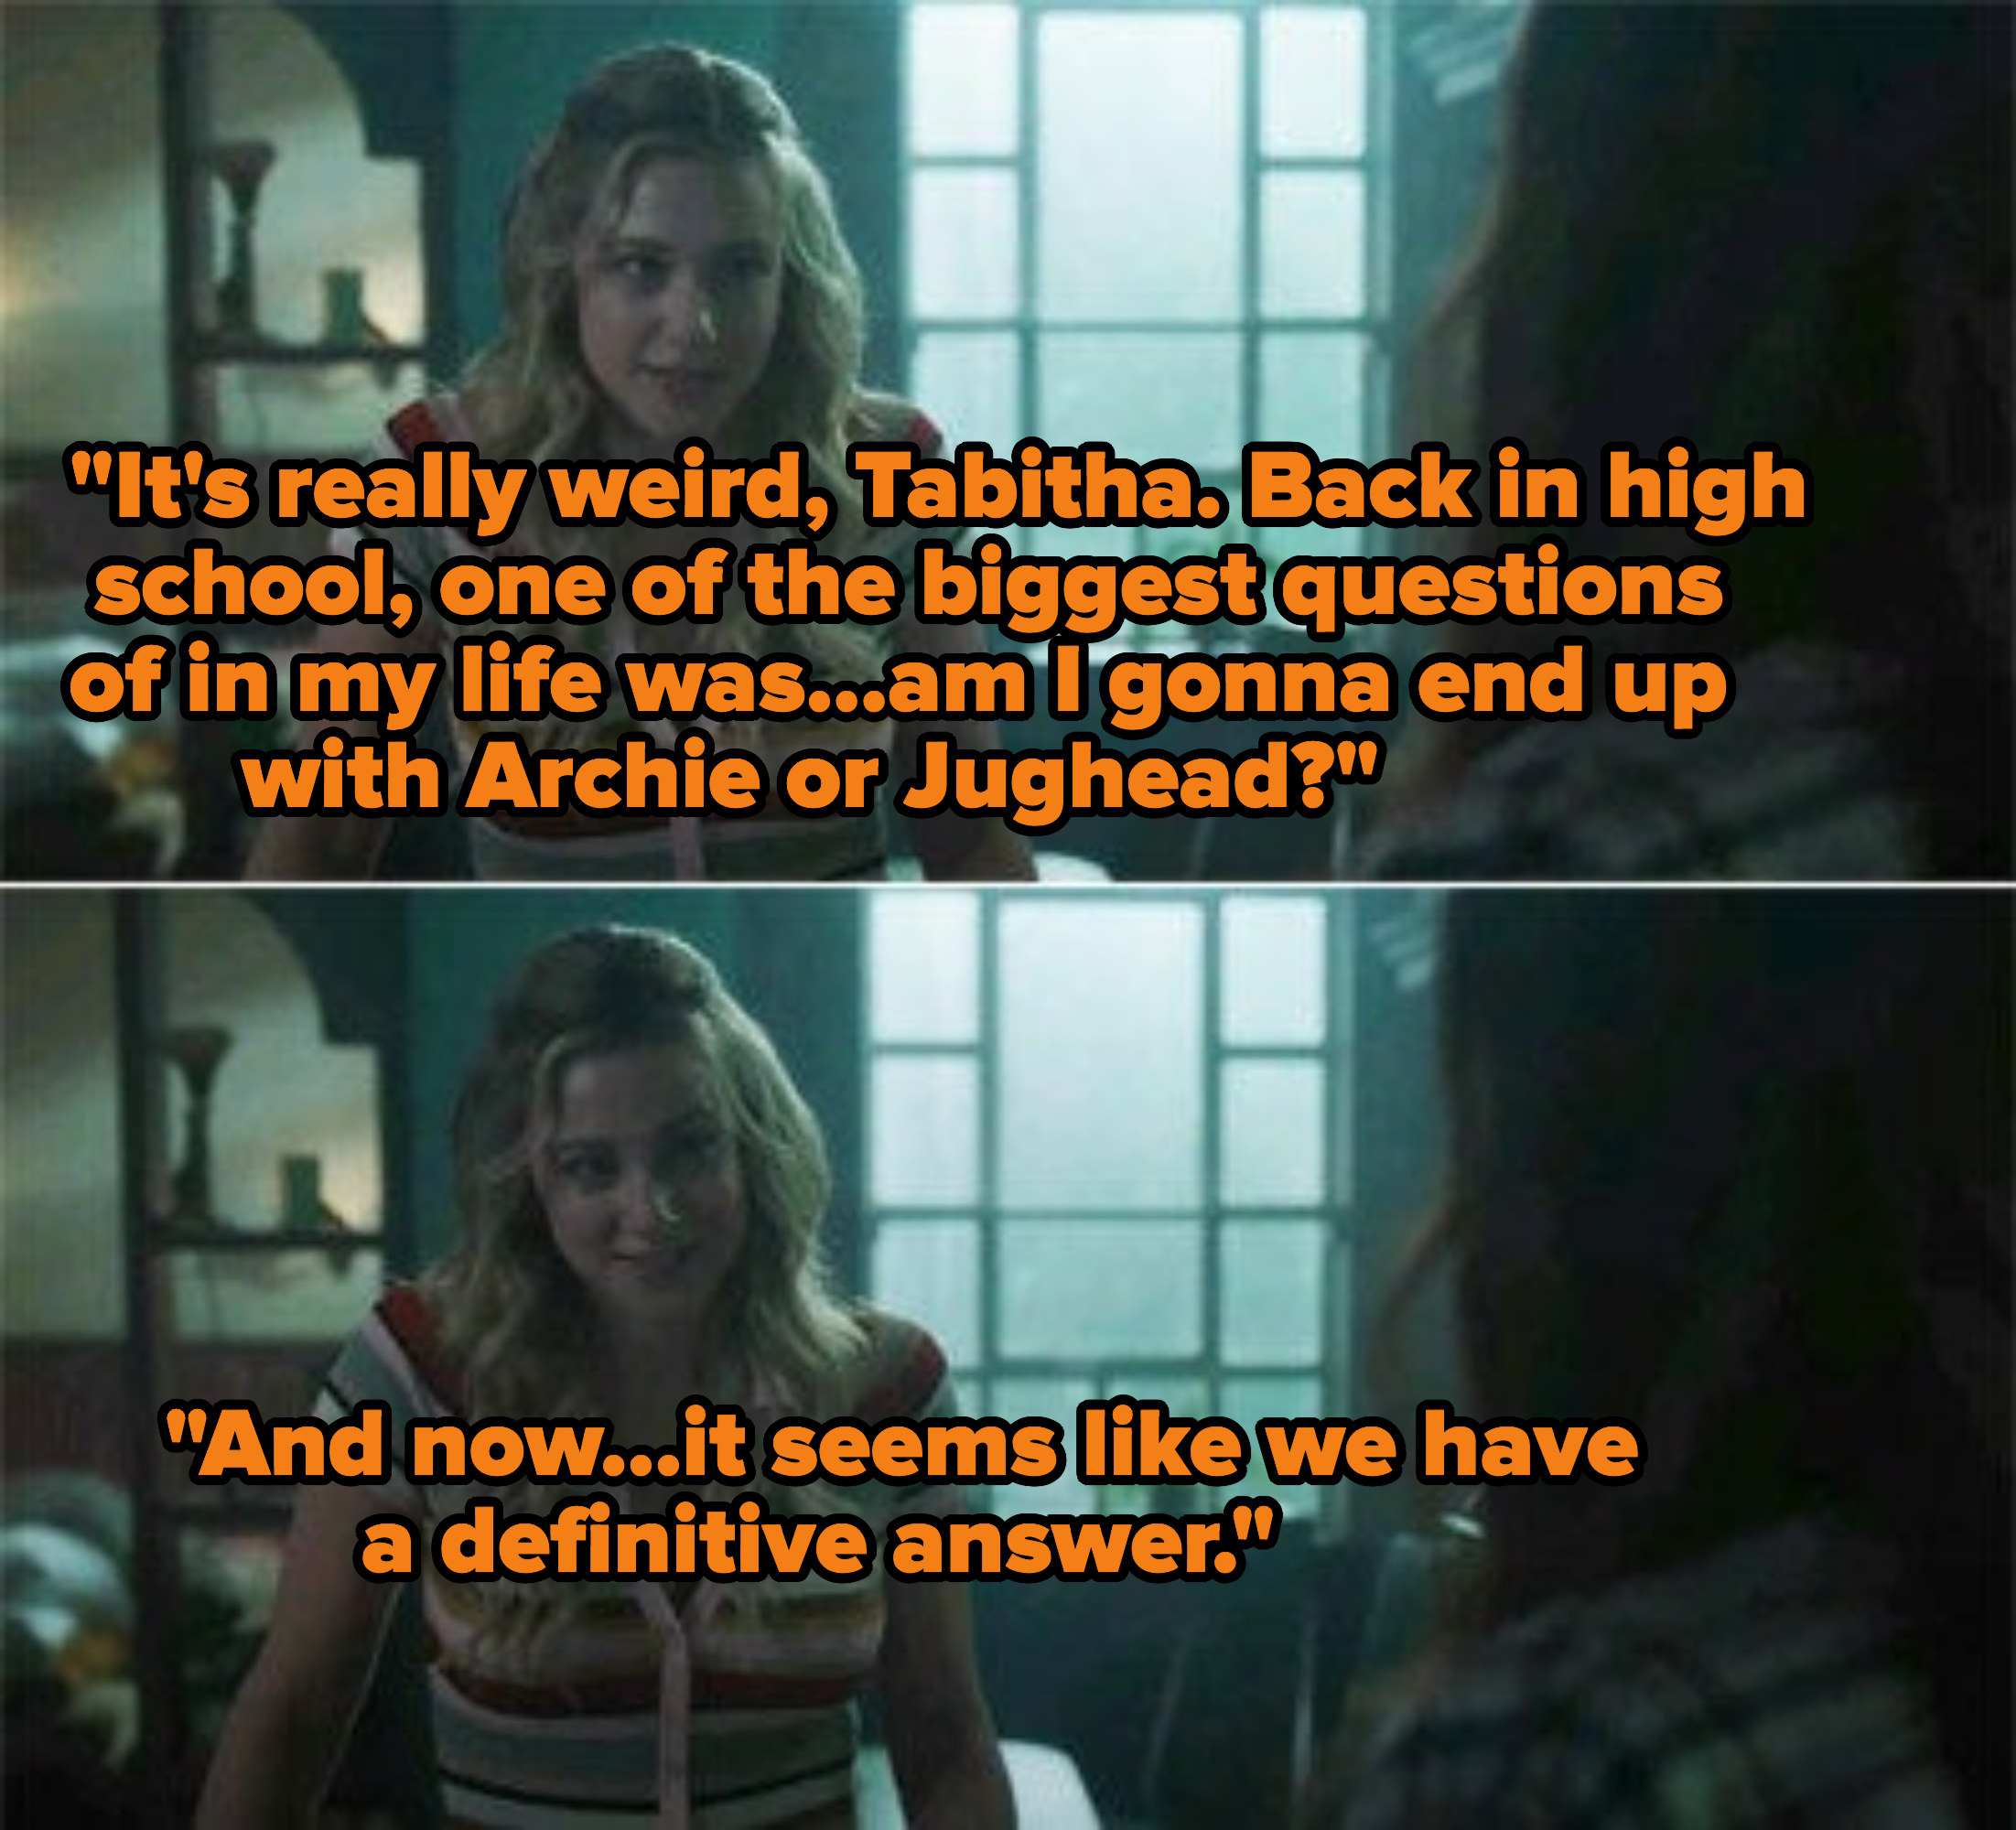 Betty tells Tabitha that one of her biggest questions in high school was whether she&#x27;d end up with Archie or Jughead, and now it seems like they have the definitive answer